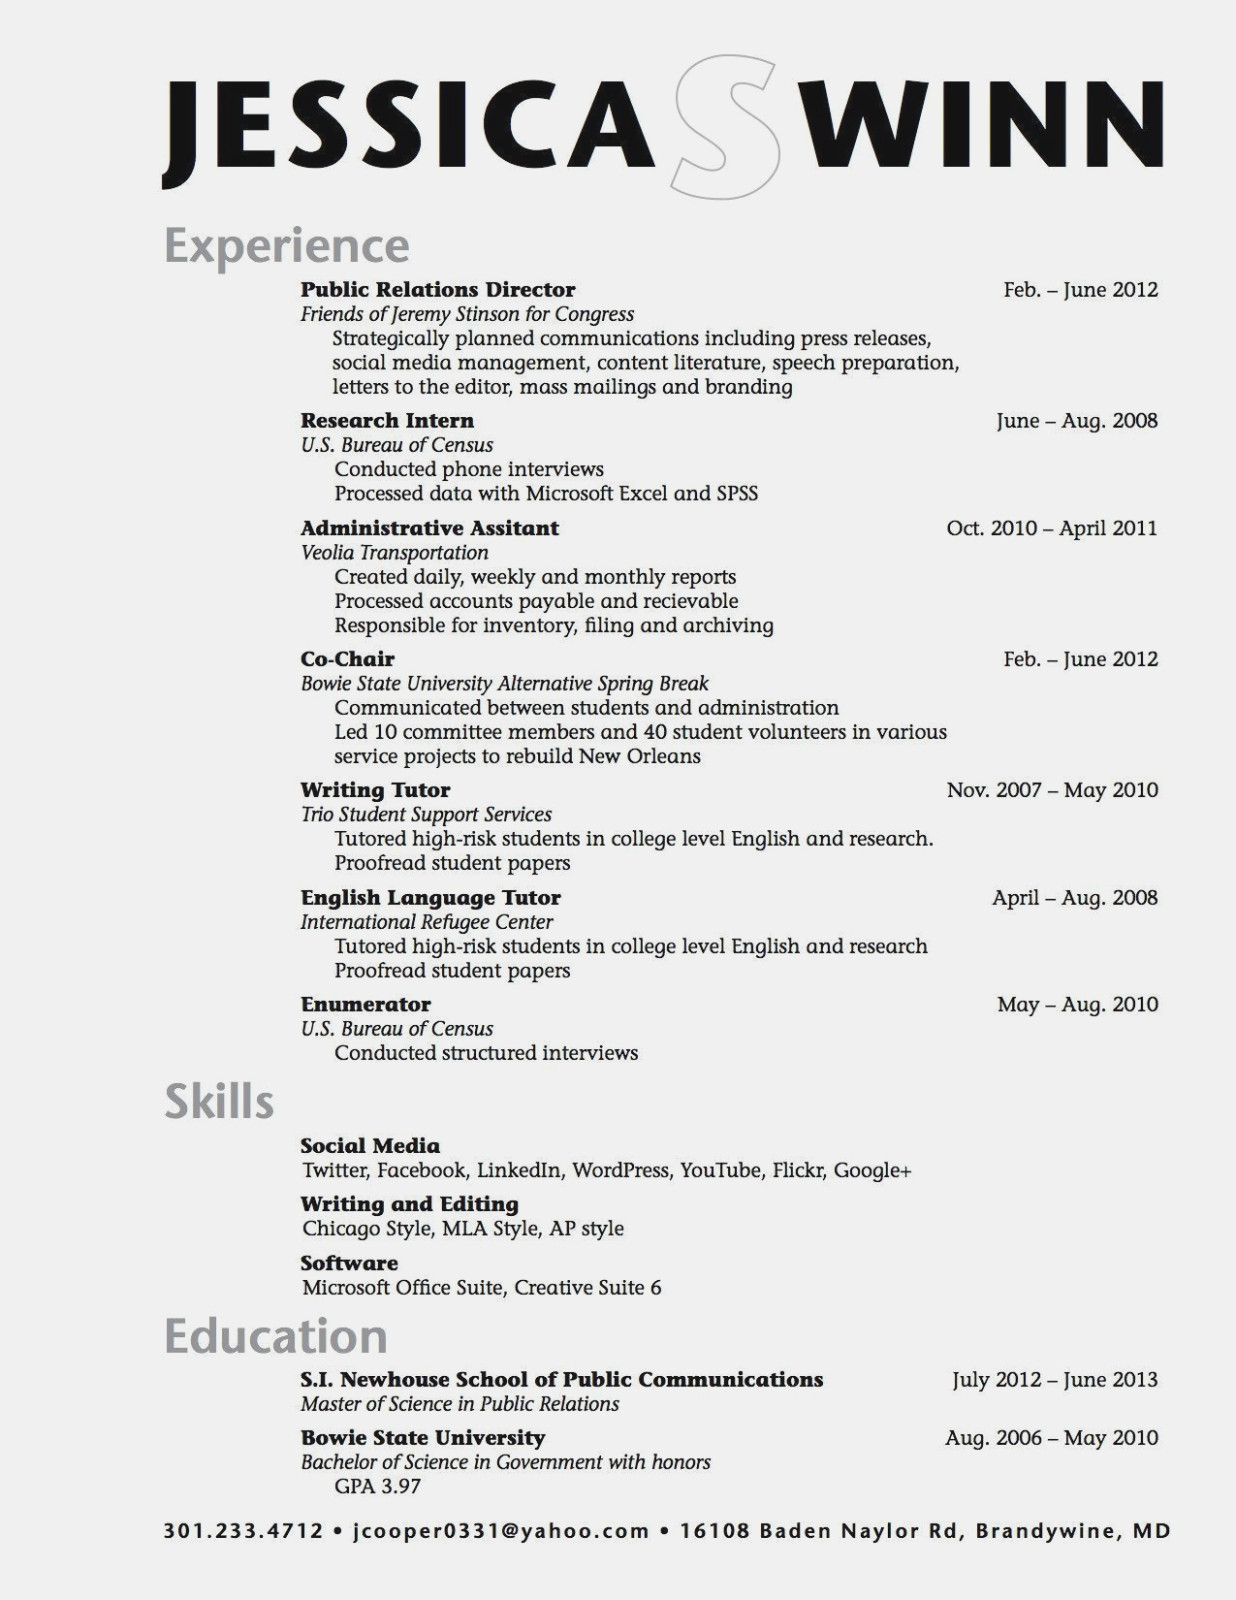 Additional coursework on resume 7/8